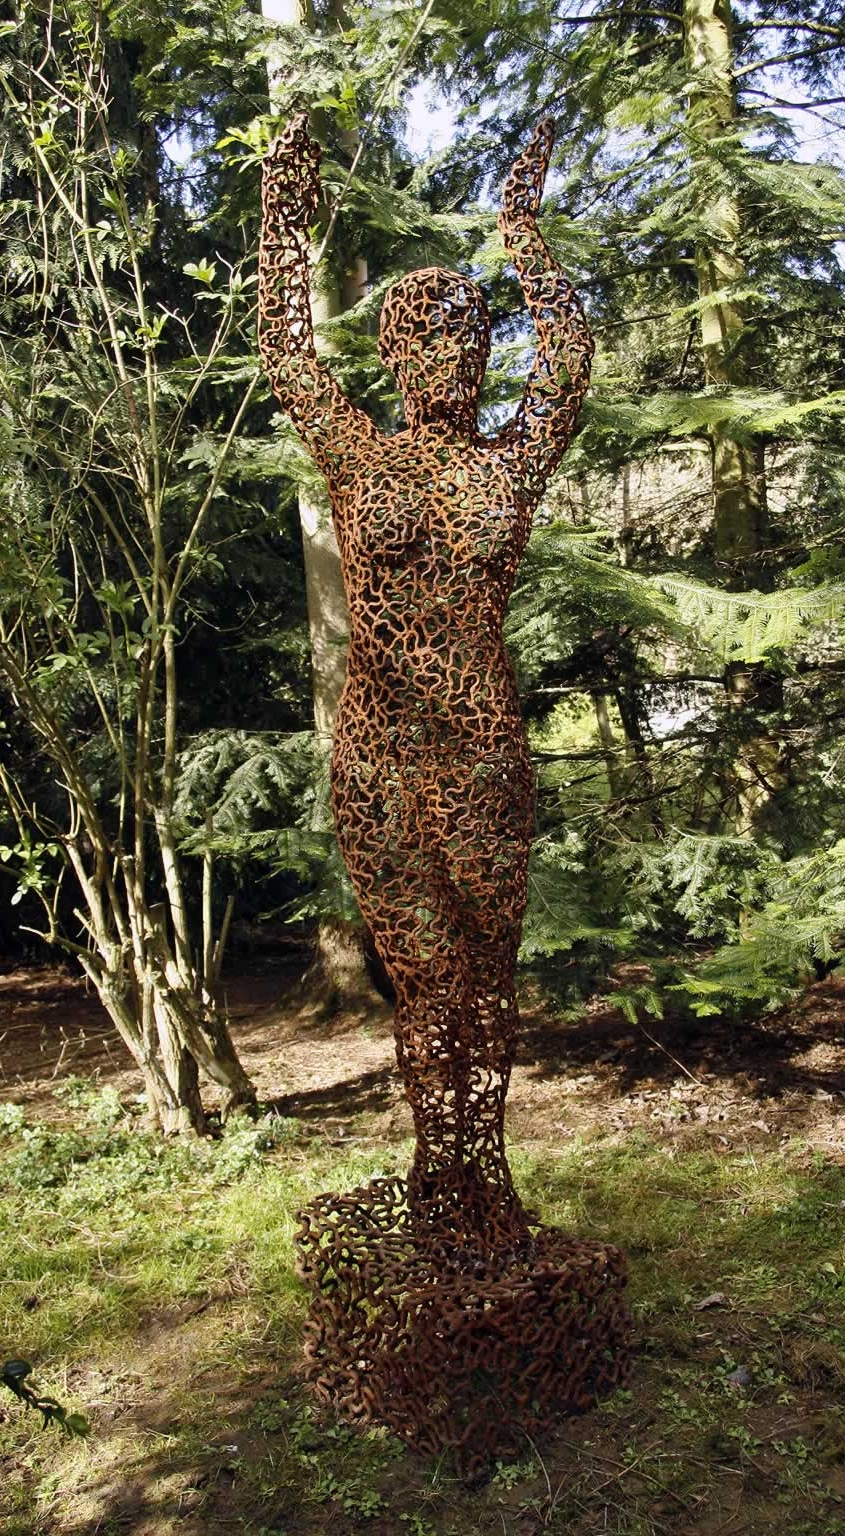 Eve at Burghley House (abstract figurative sculpture) by sculptor Ian Campbell-Briggs